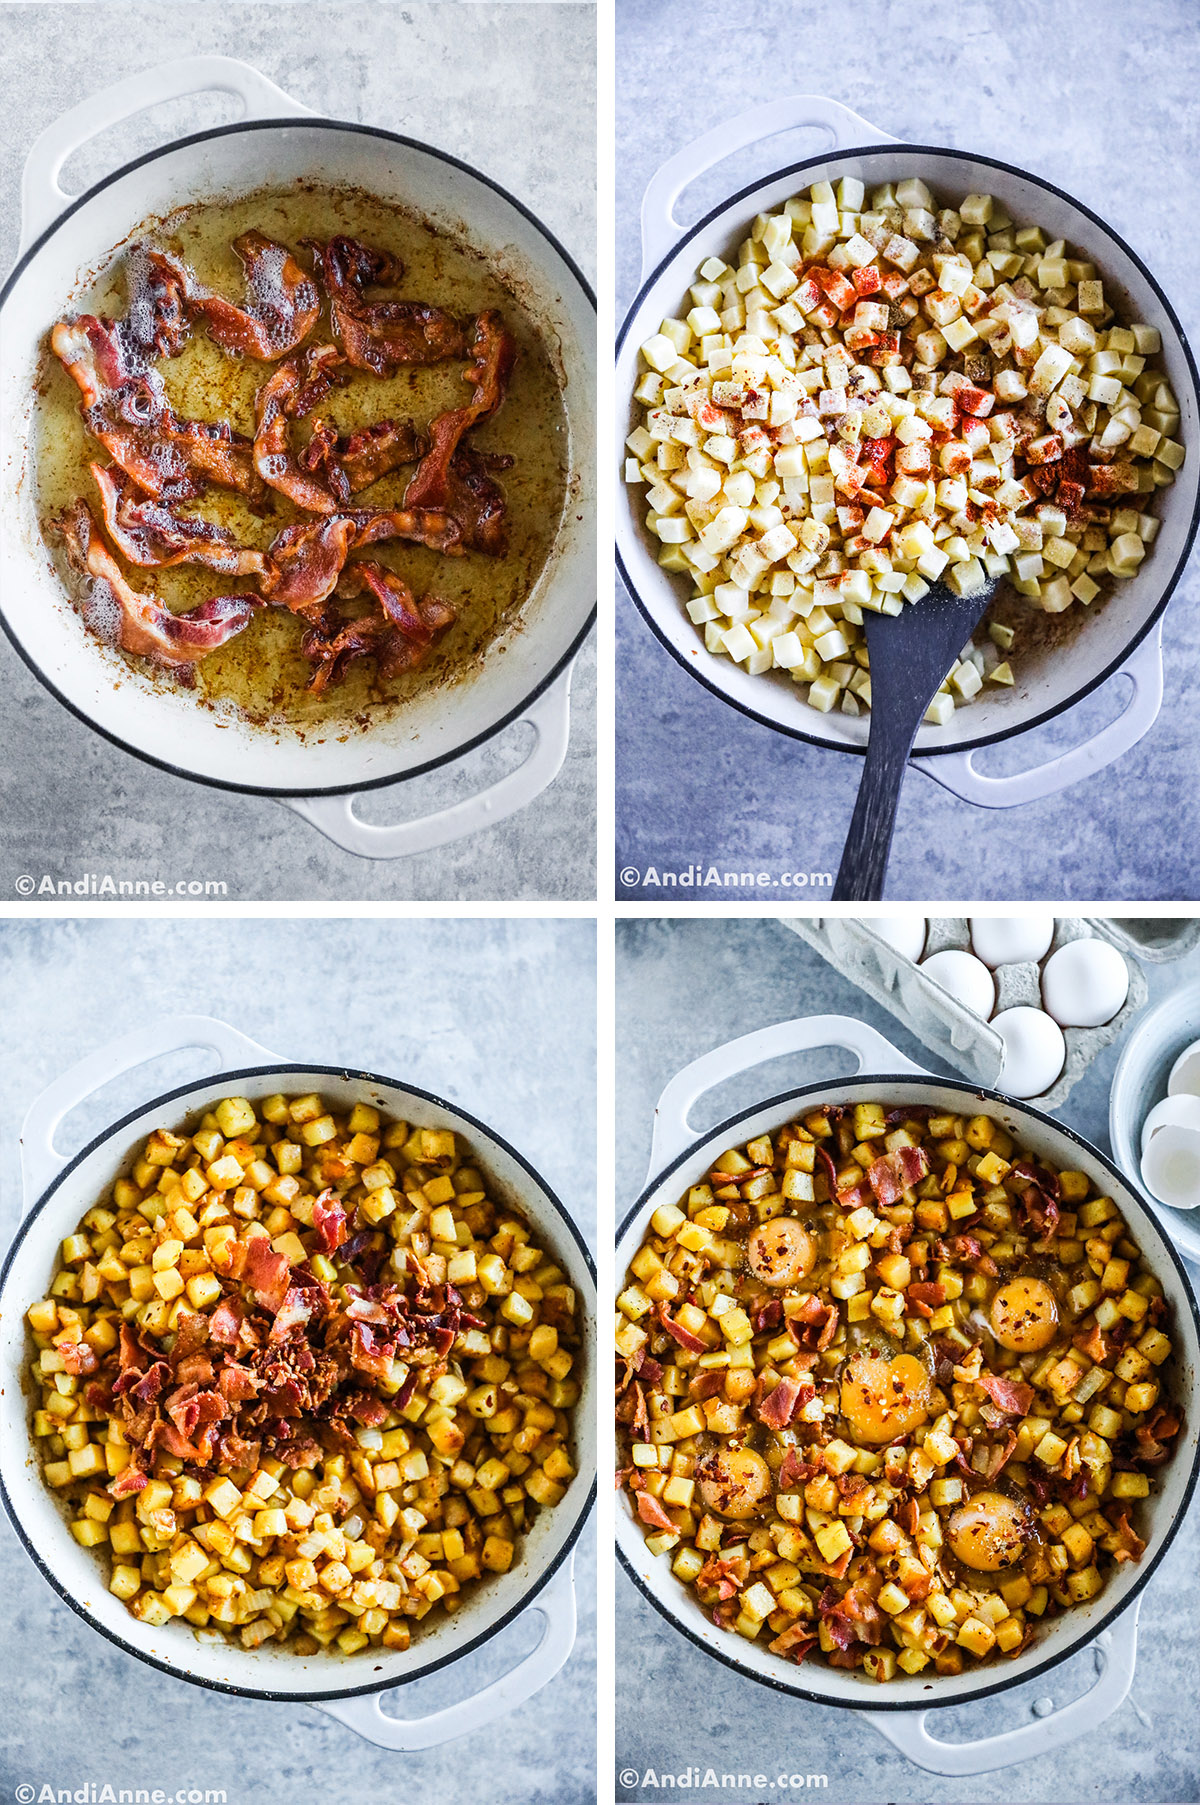 Four images grouped together. First is bacon cooking in pan, second is frozen hash browns topped with spices in pan, third is bacon dumped on top of hash browns, fourth is eggs cracked over top of hashbrowns.